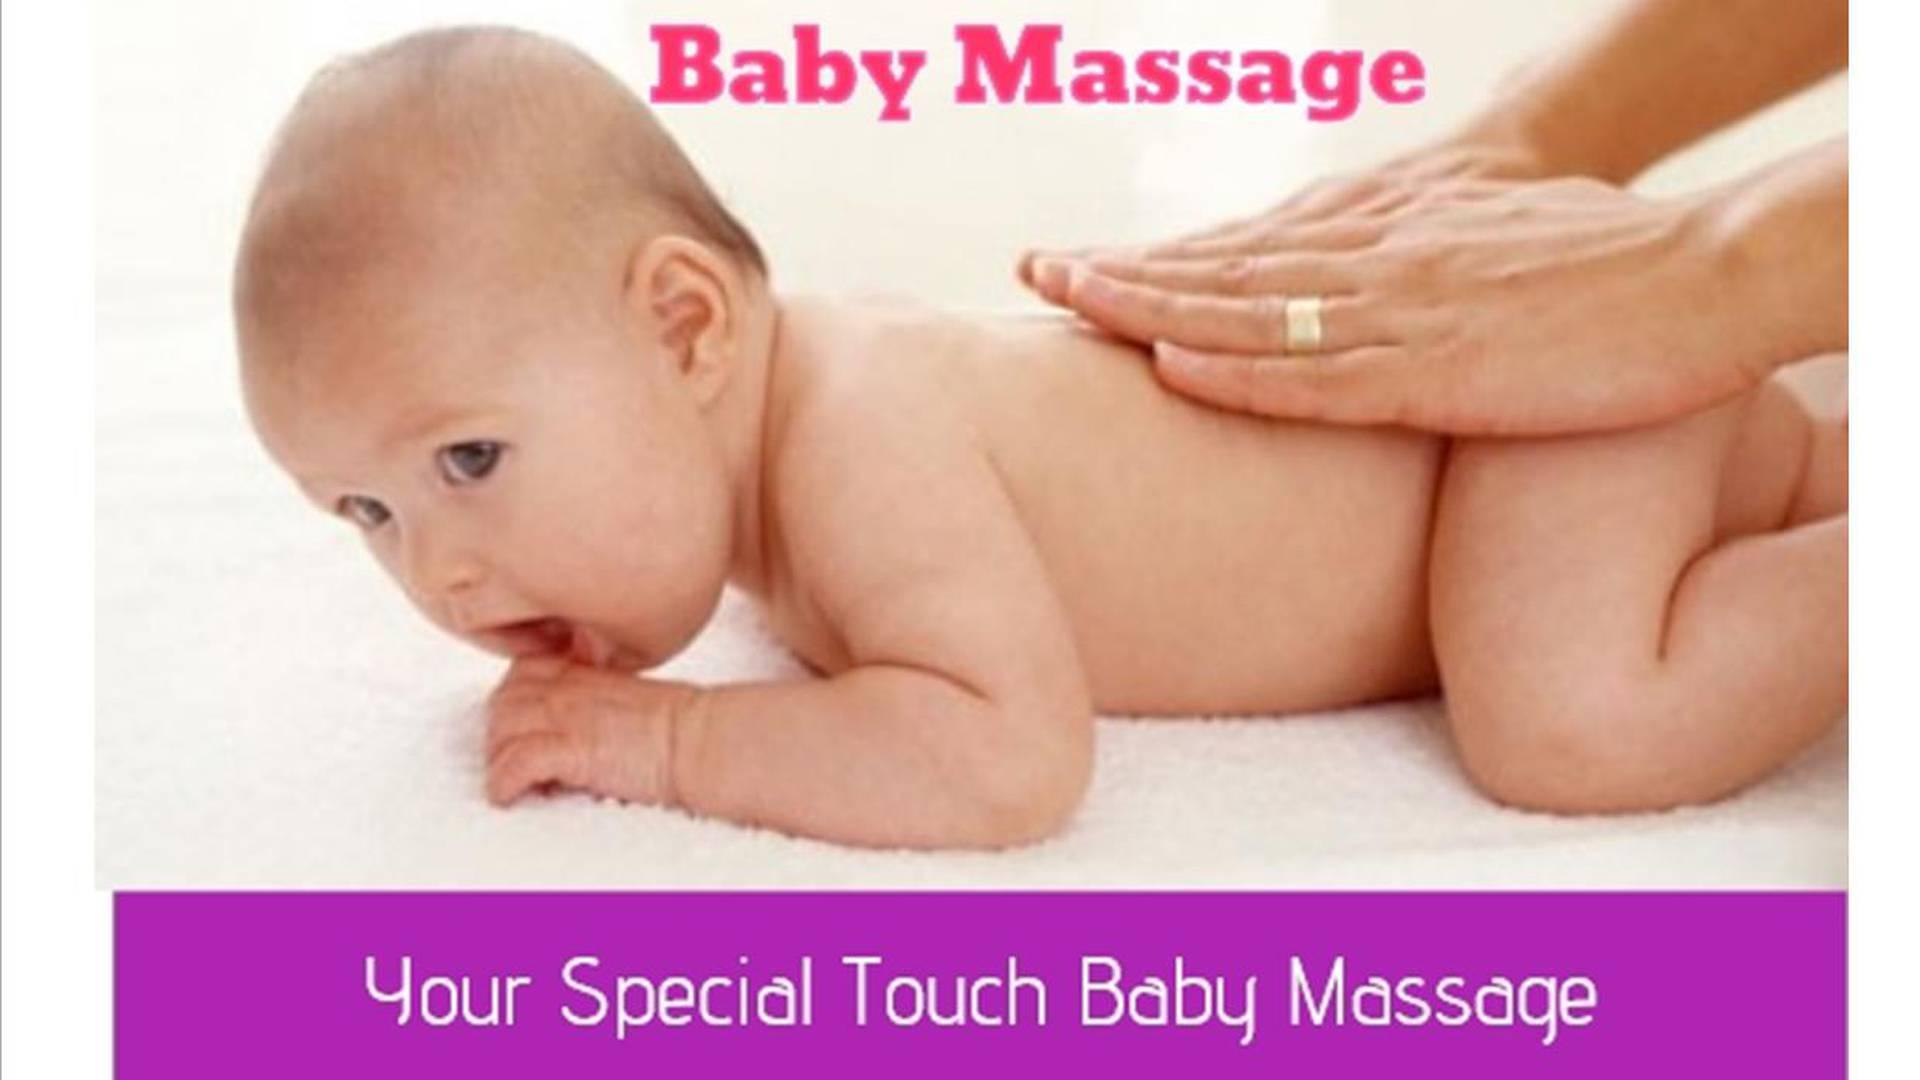 Your Special Touch Baby Massage photo